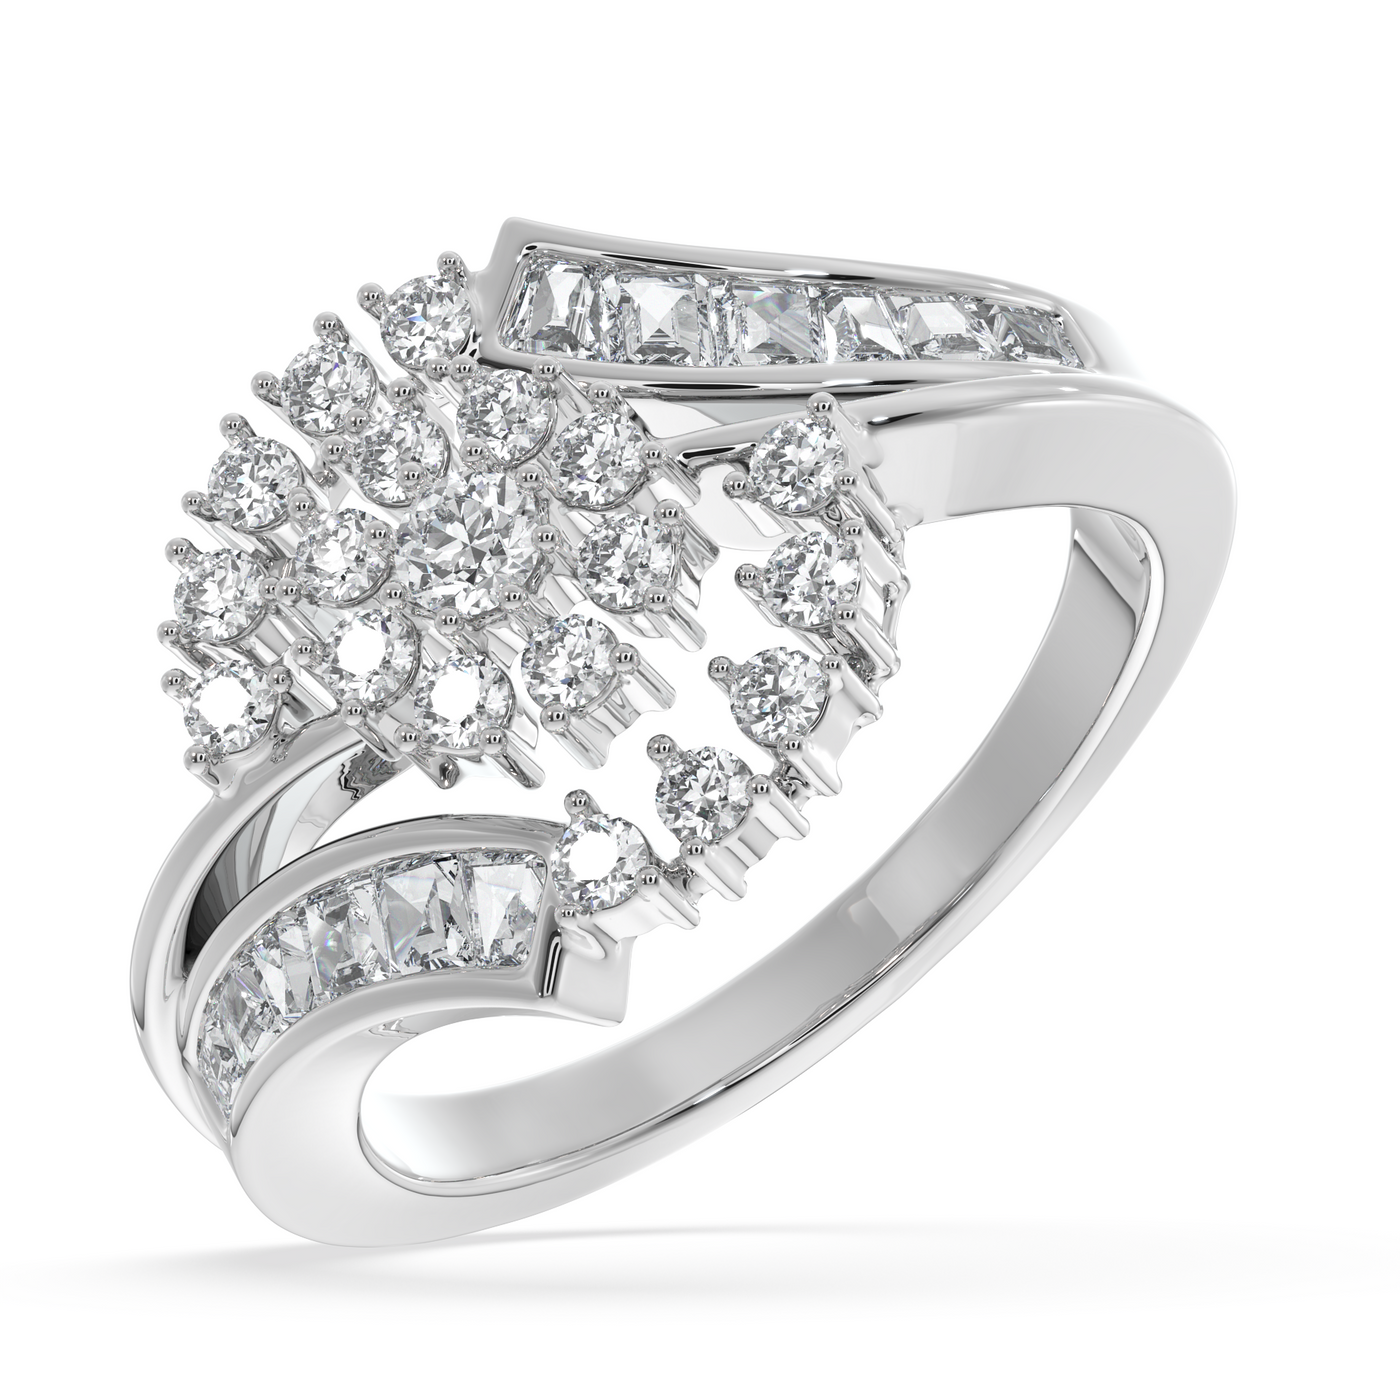 SY Women's Ring in Platinum, Enchanted Bloom